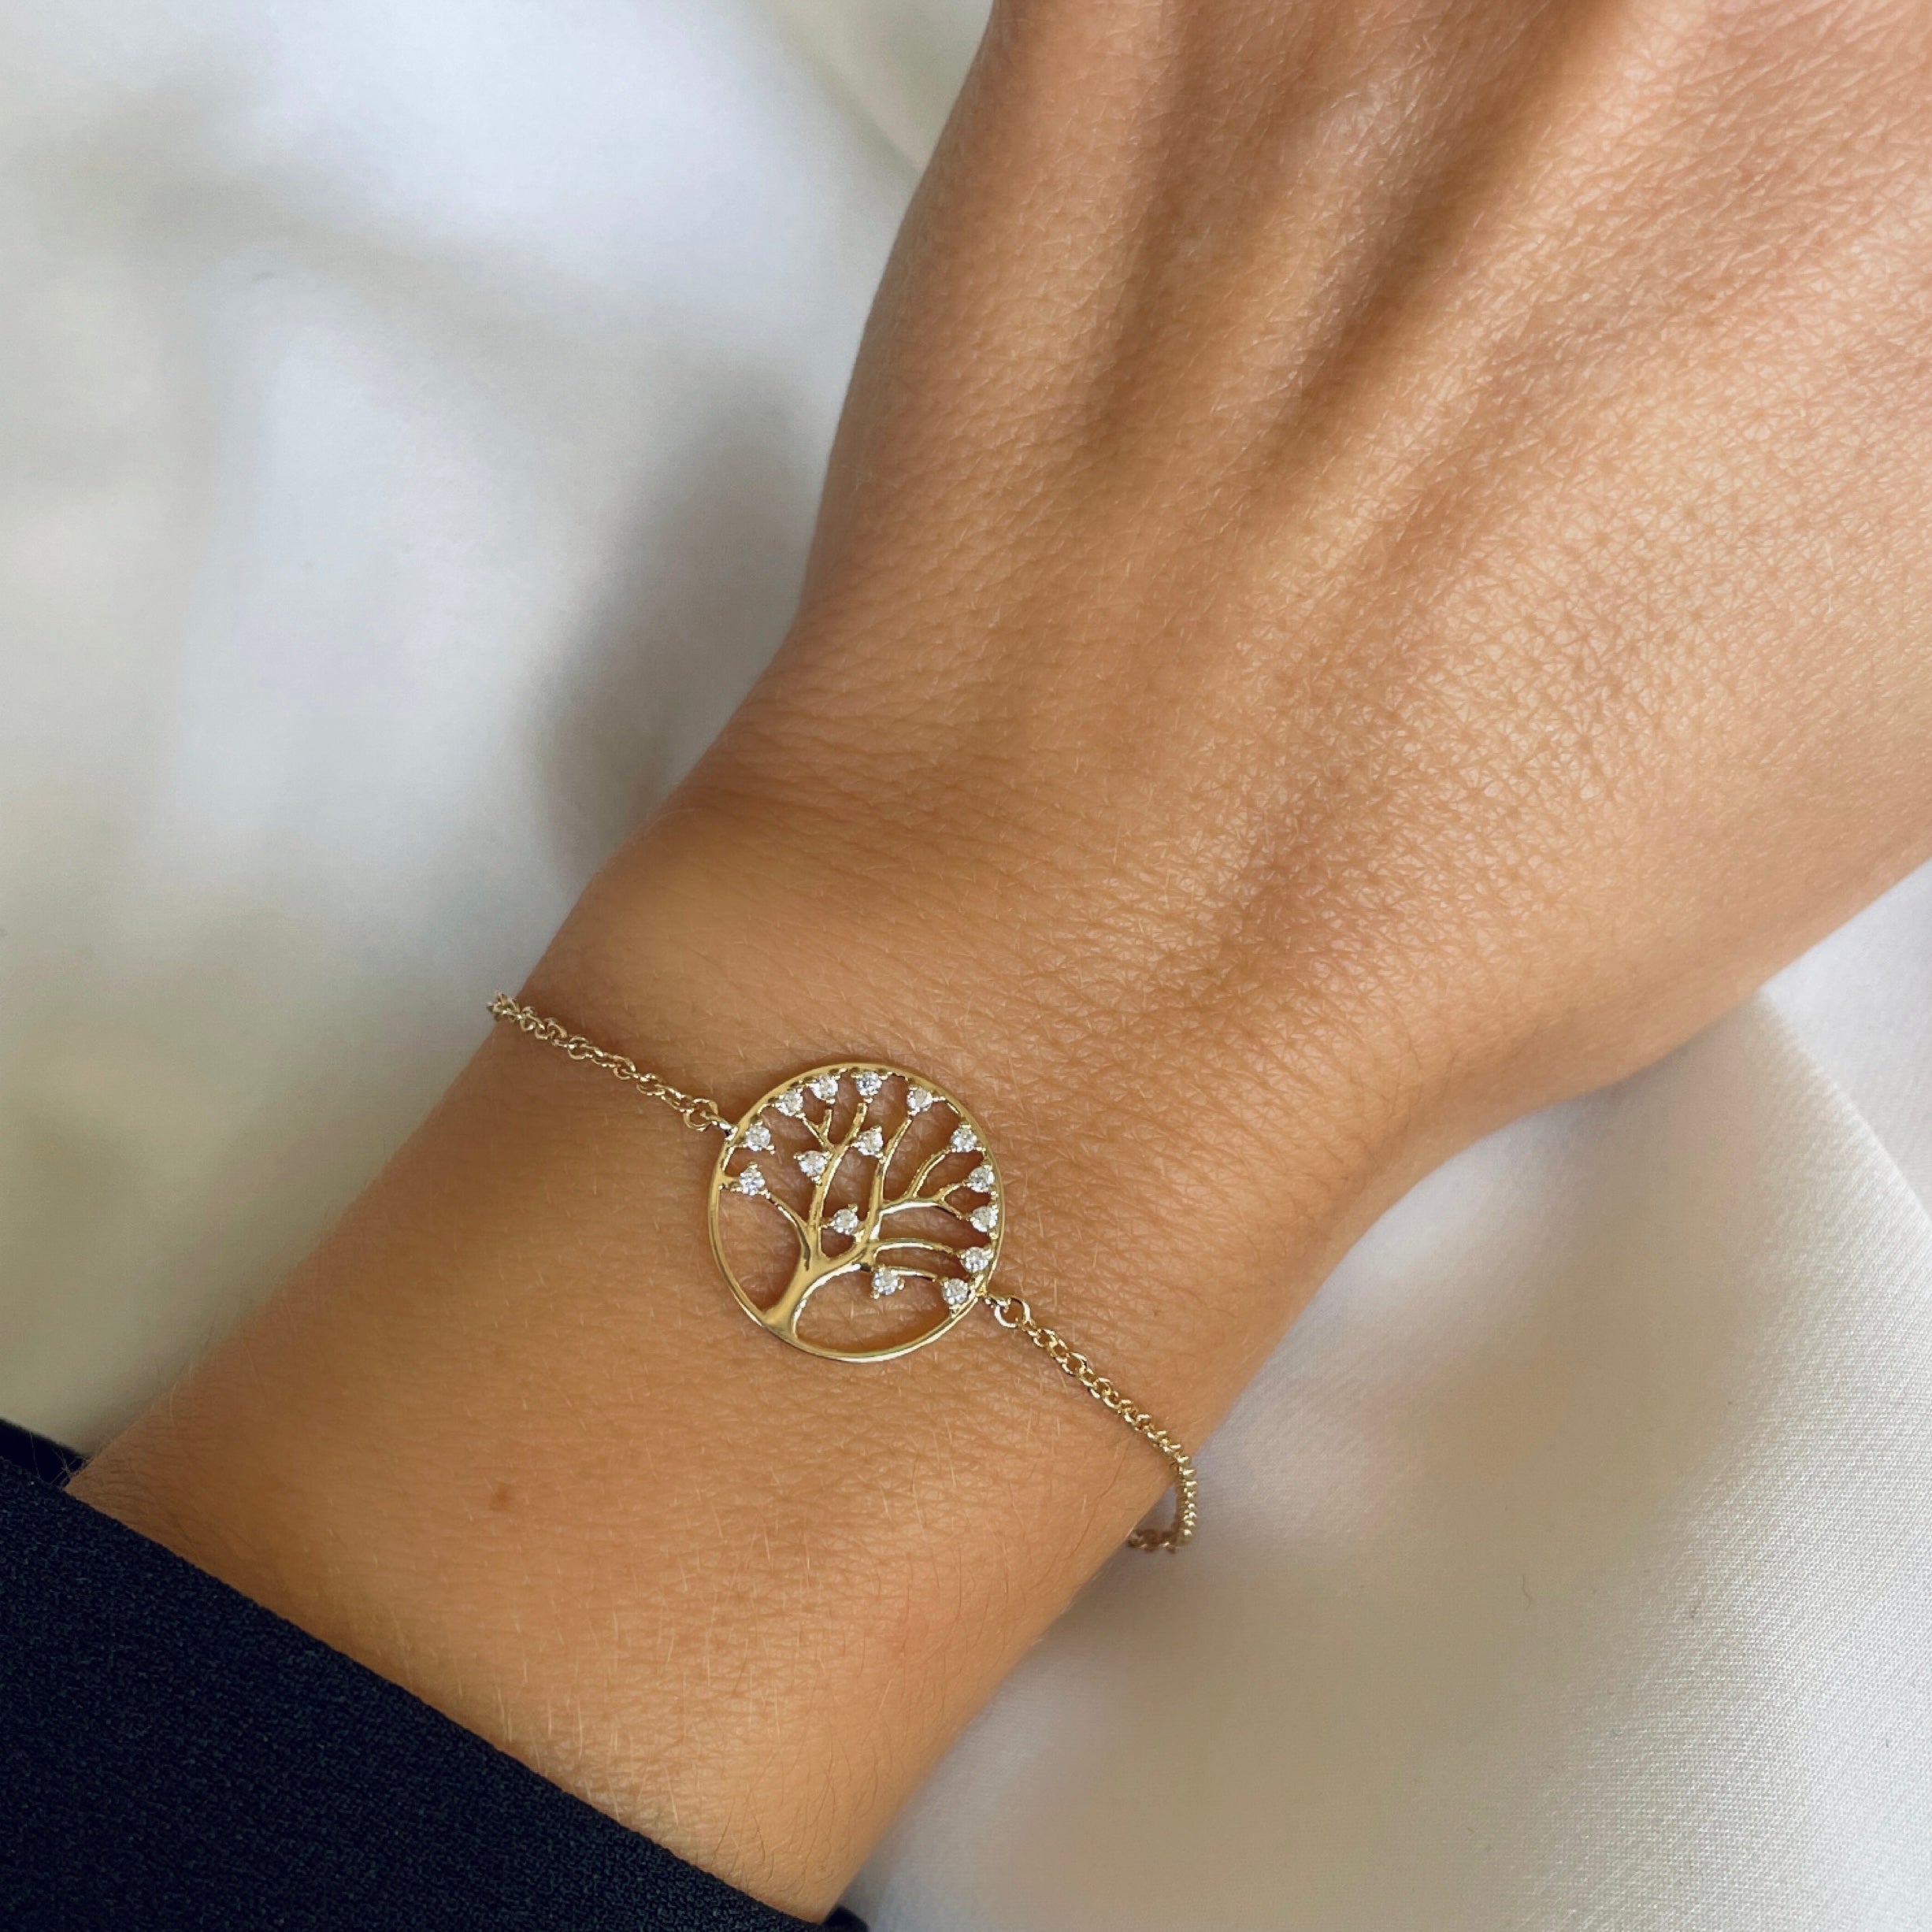 Gold-plated “Tree of Life” bracelet